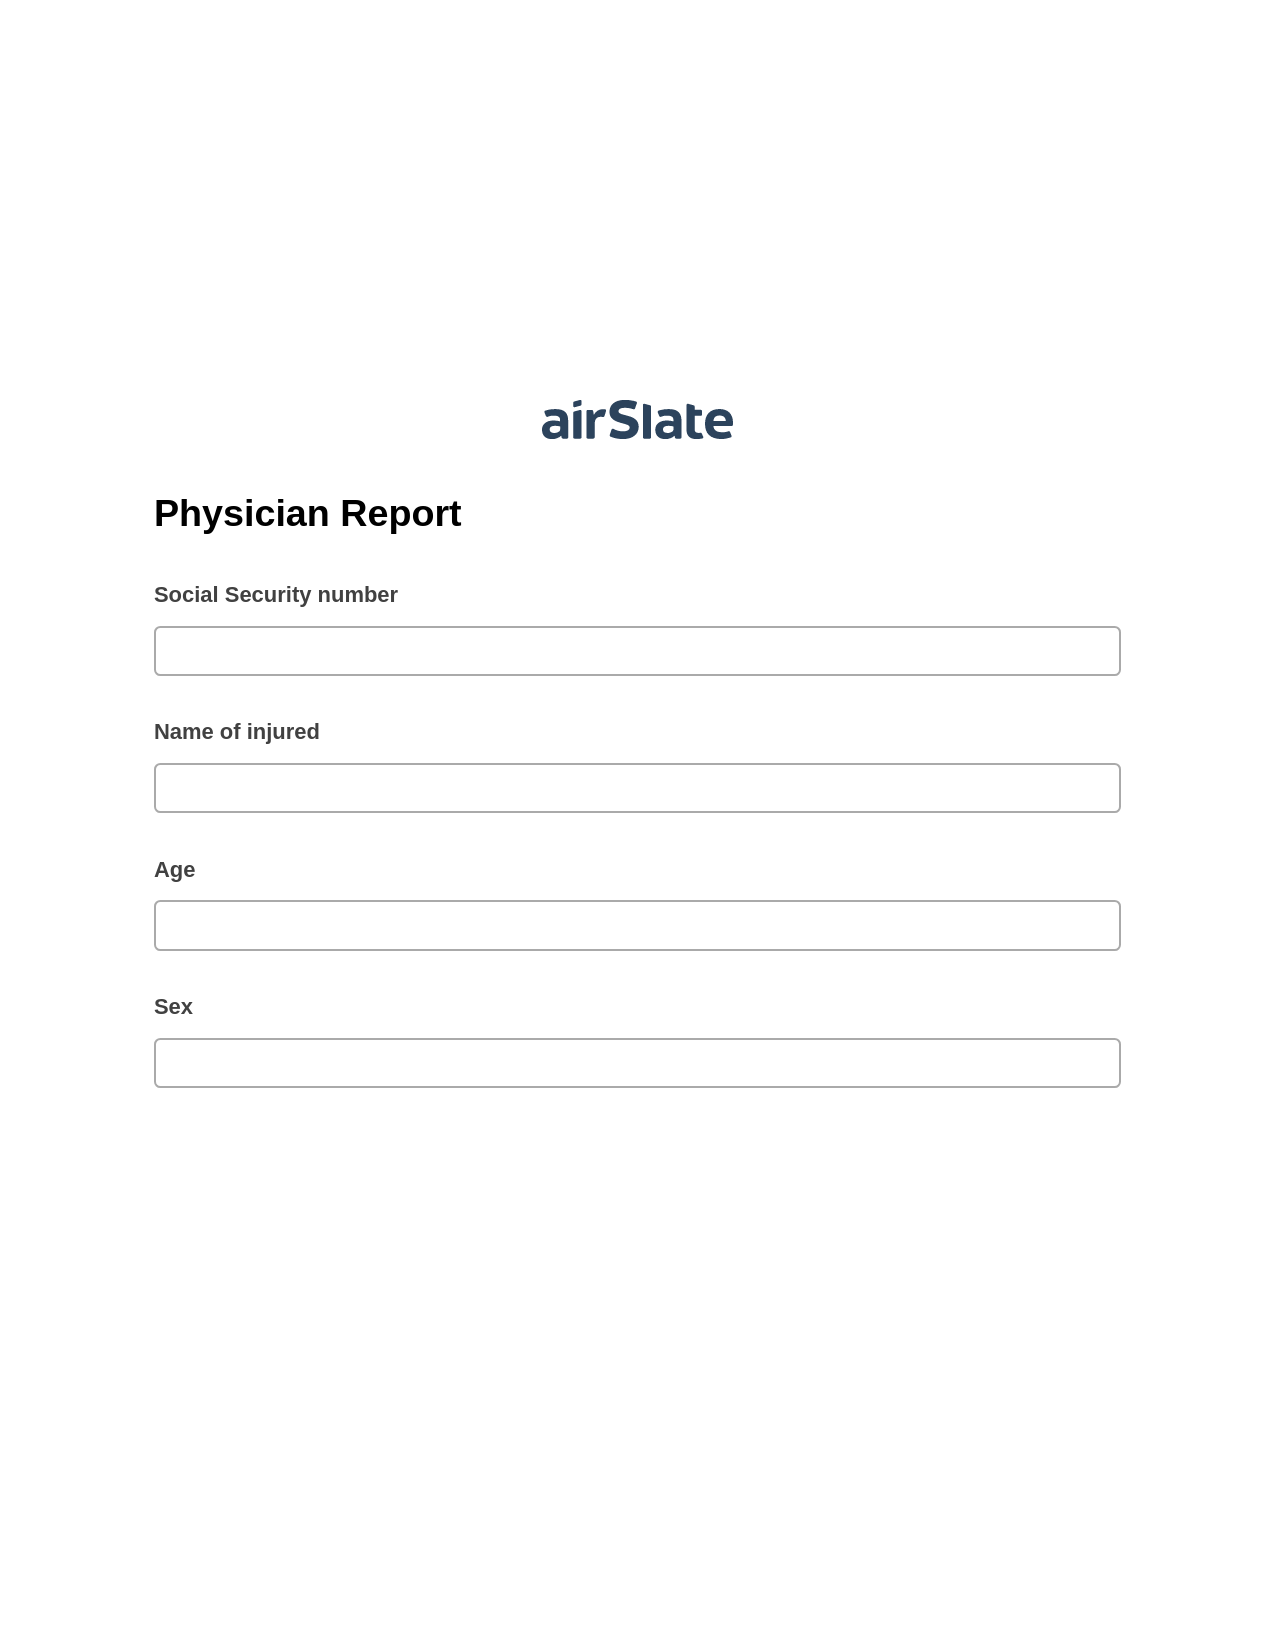 Physician Report Pre-fill from CSV File Bot, Create NetSuite Record bot, Export to Excel 365 Bot